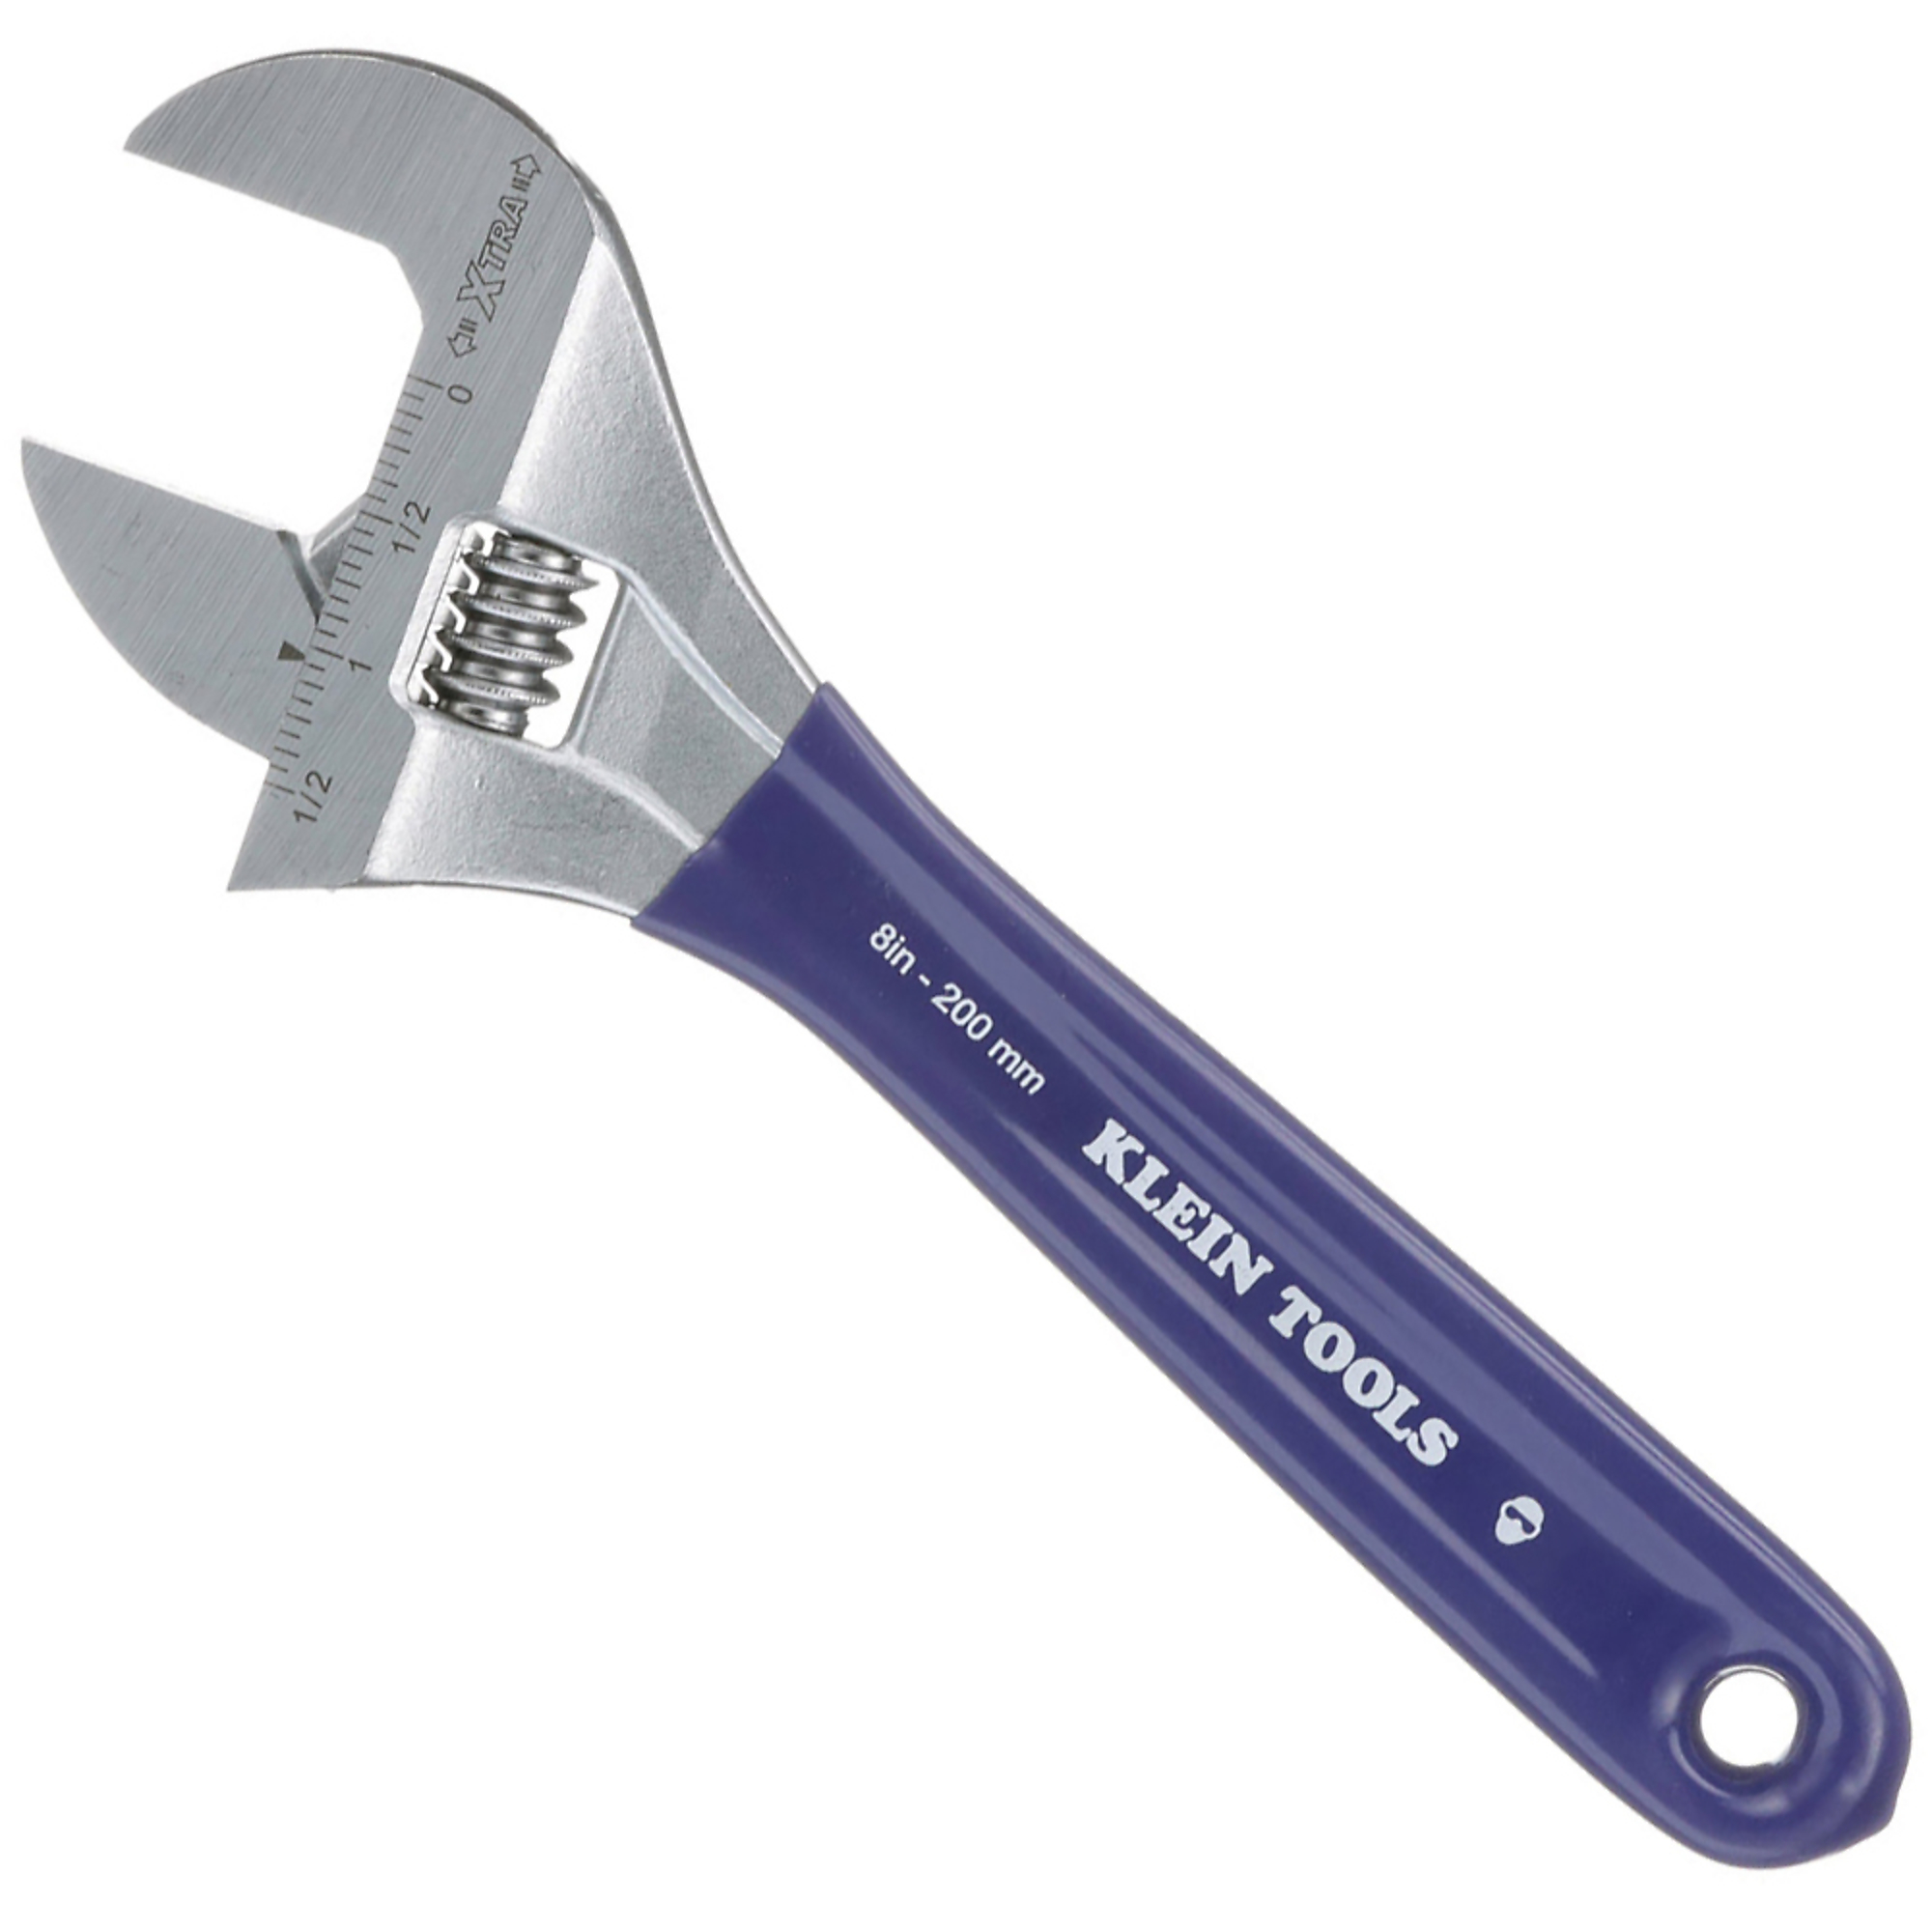 Klein Tools, Adj. Wrench, Extra-Wide Jaw, 8Inch, Pieces (qty.) 1 Tool Length 8.5 in, Measurement Standard Standard (SAE)/Metric, Model D509-8